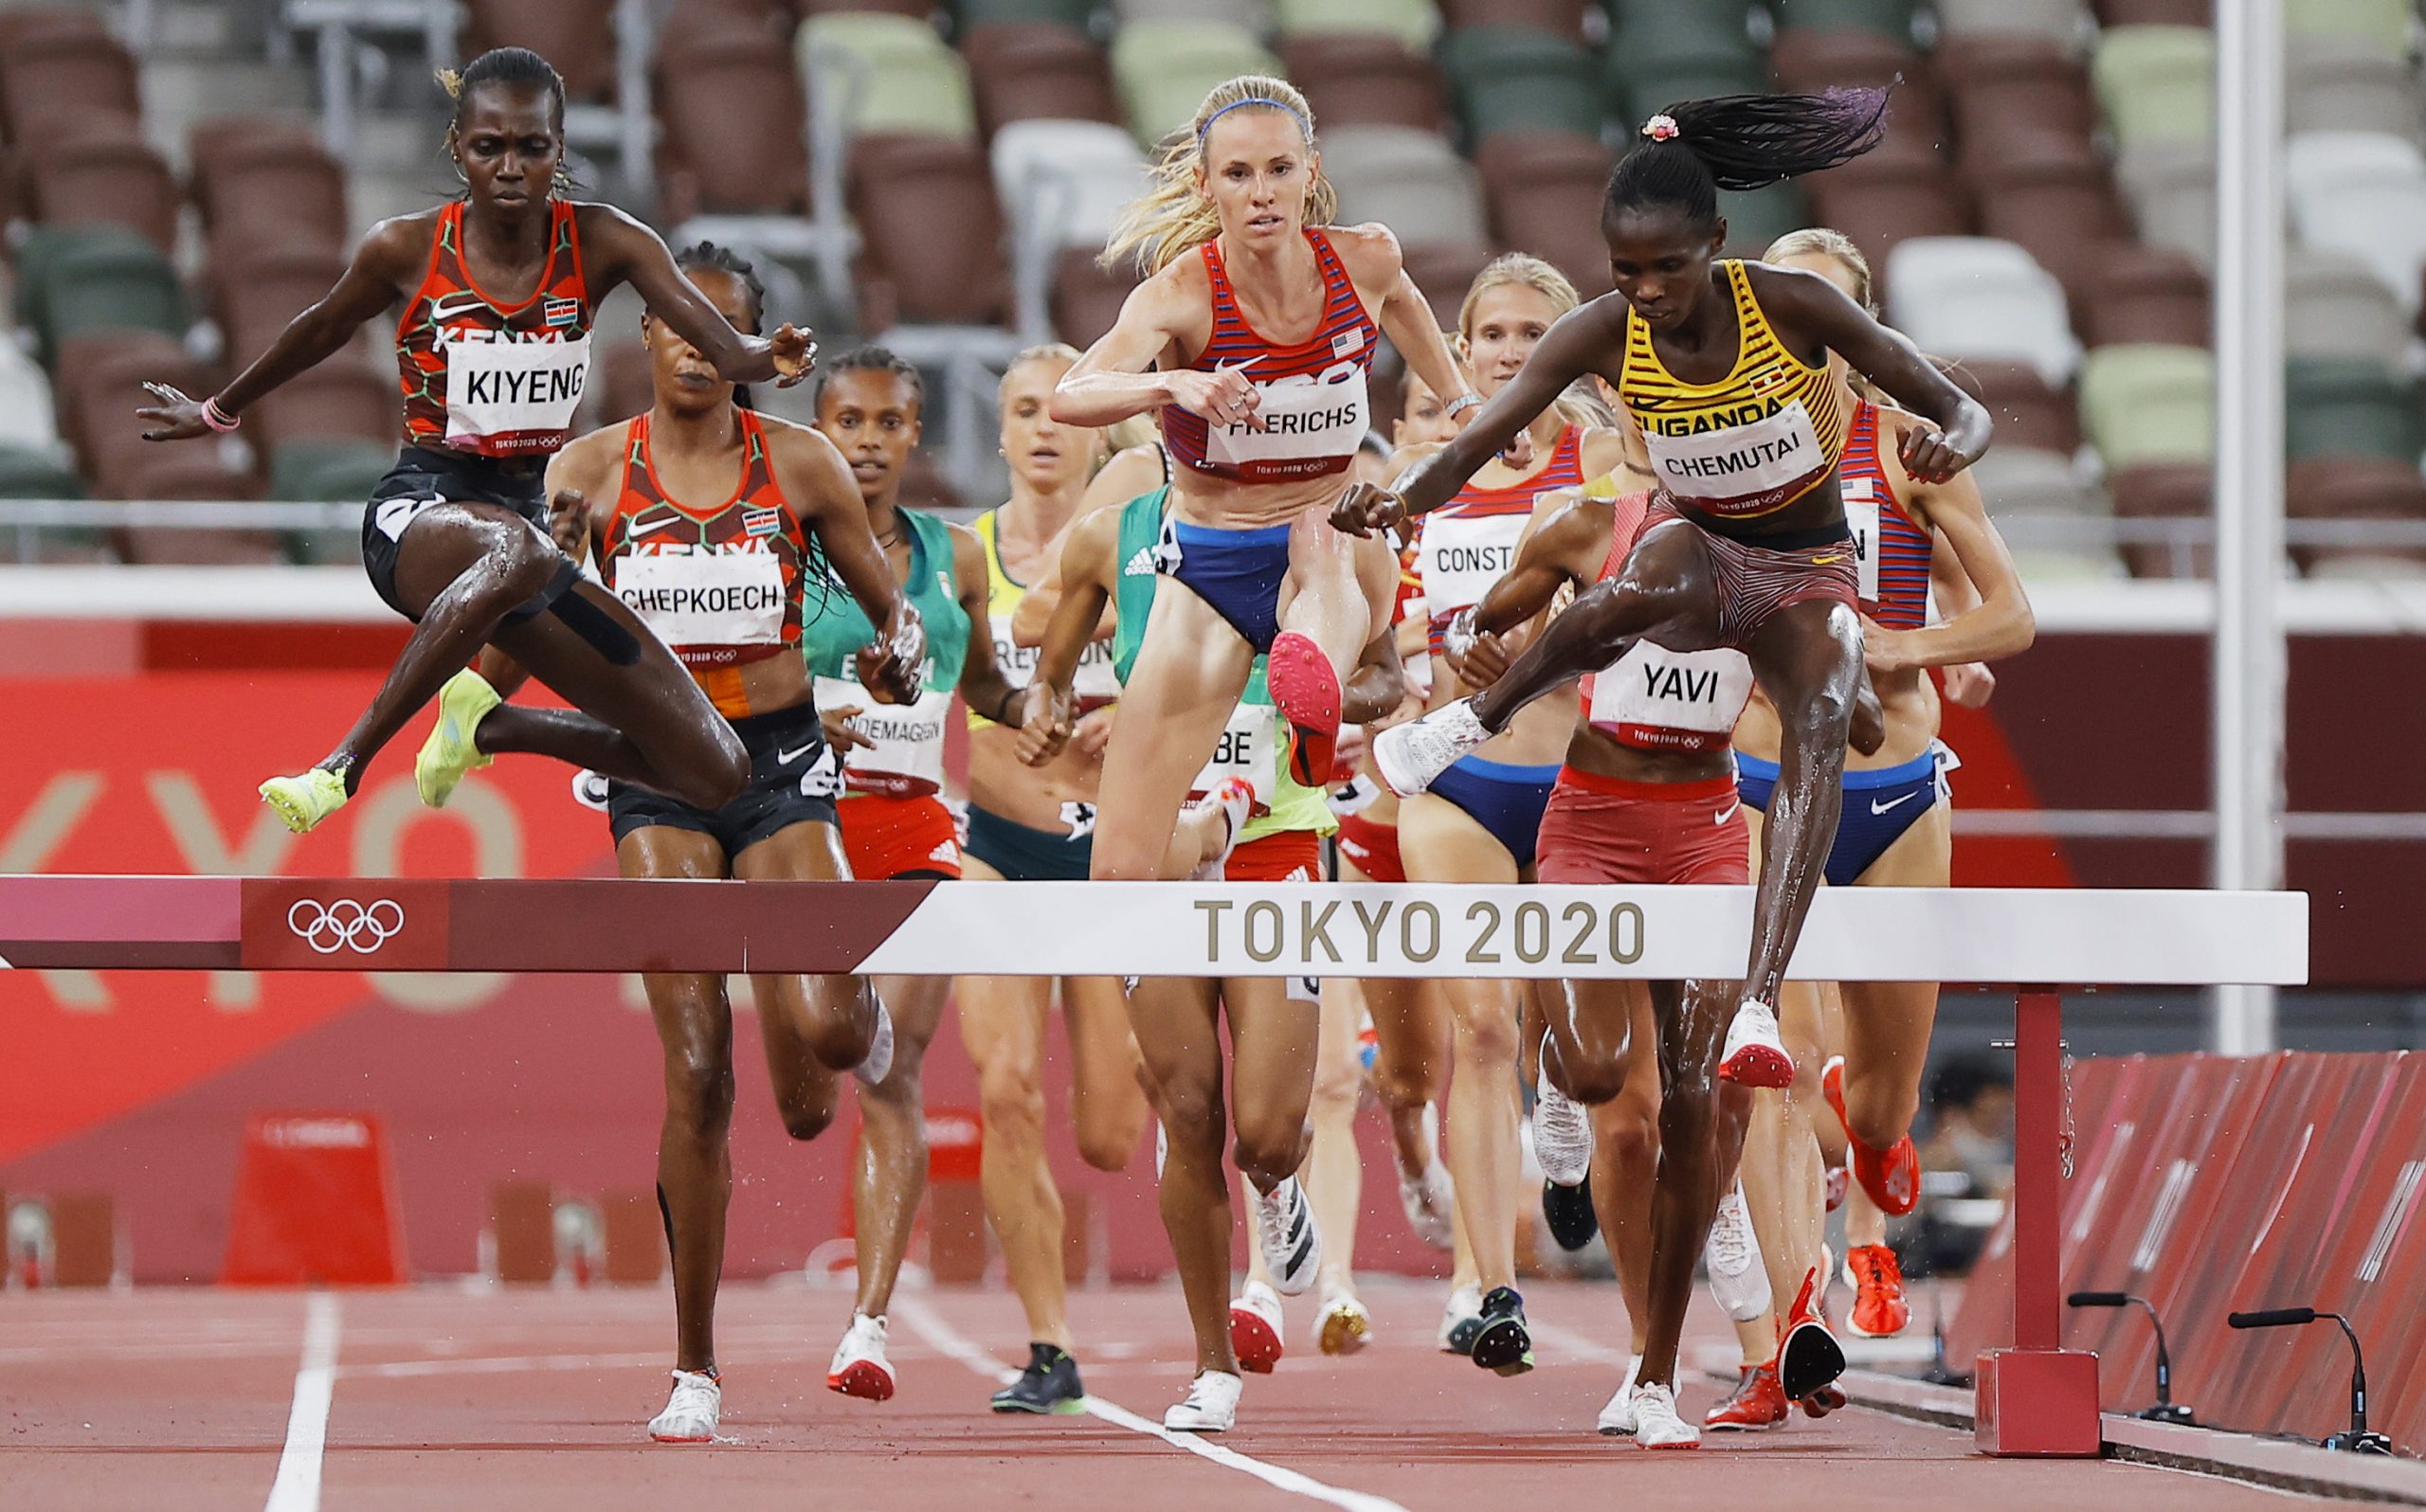 epa09394332 Peruth Chemutai (R) of Uganda on her way winning the Women's 3000m Steeplechase final during the Athletics events of the Tokyo 2020 Olympic Games at the Olympic Stadium in Tokyo, Japan, 04 August 2021.  EPA/VALDRIN XHEMAJ